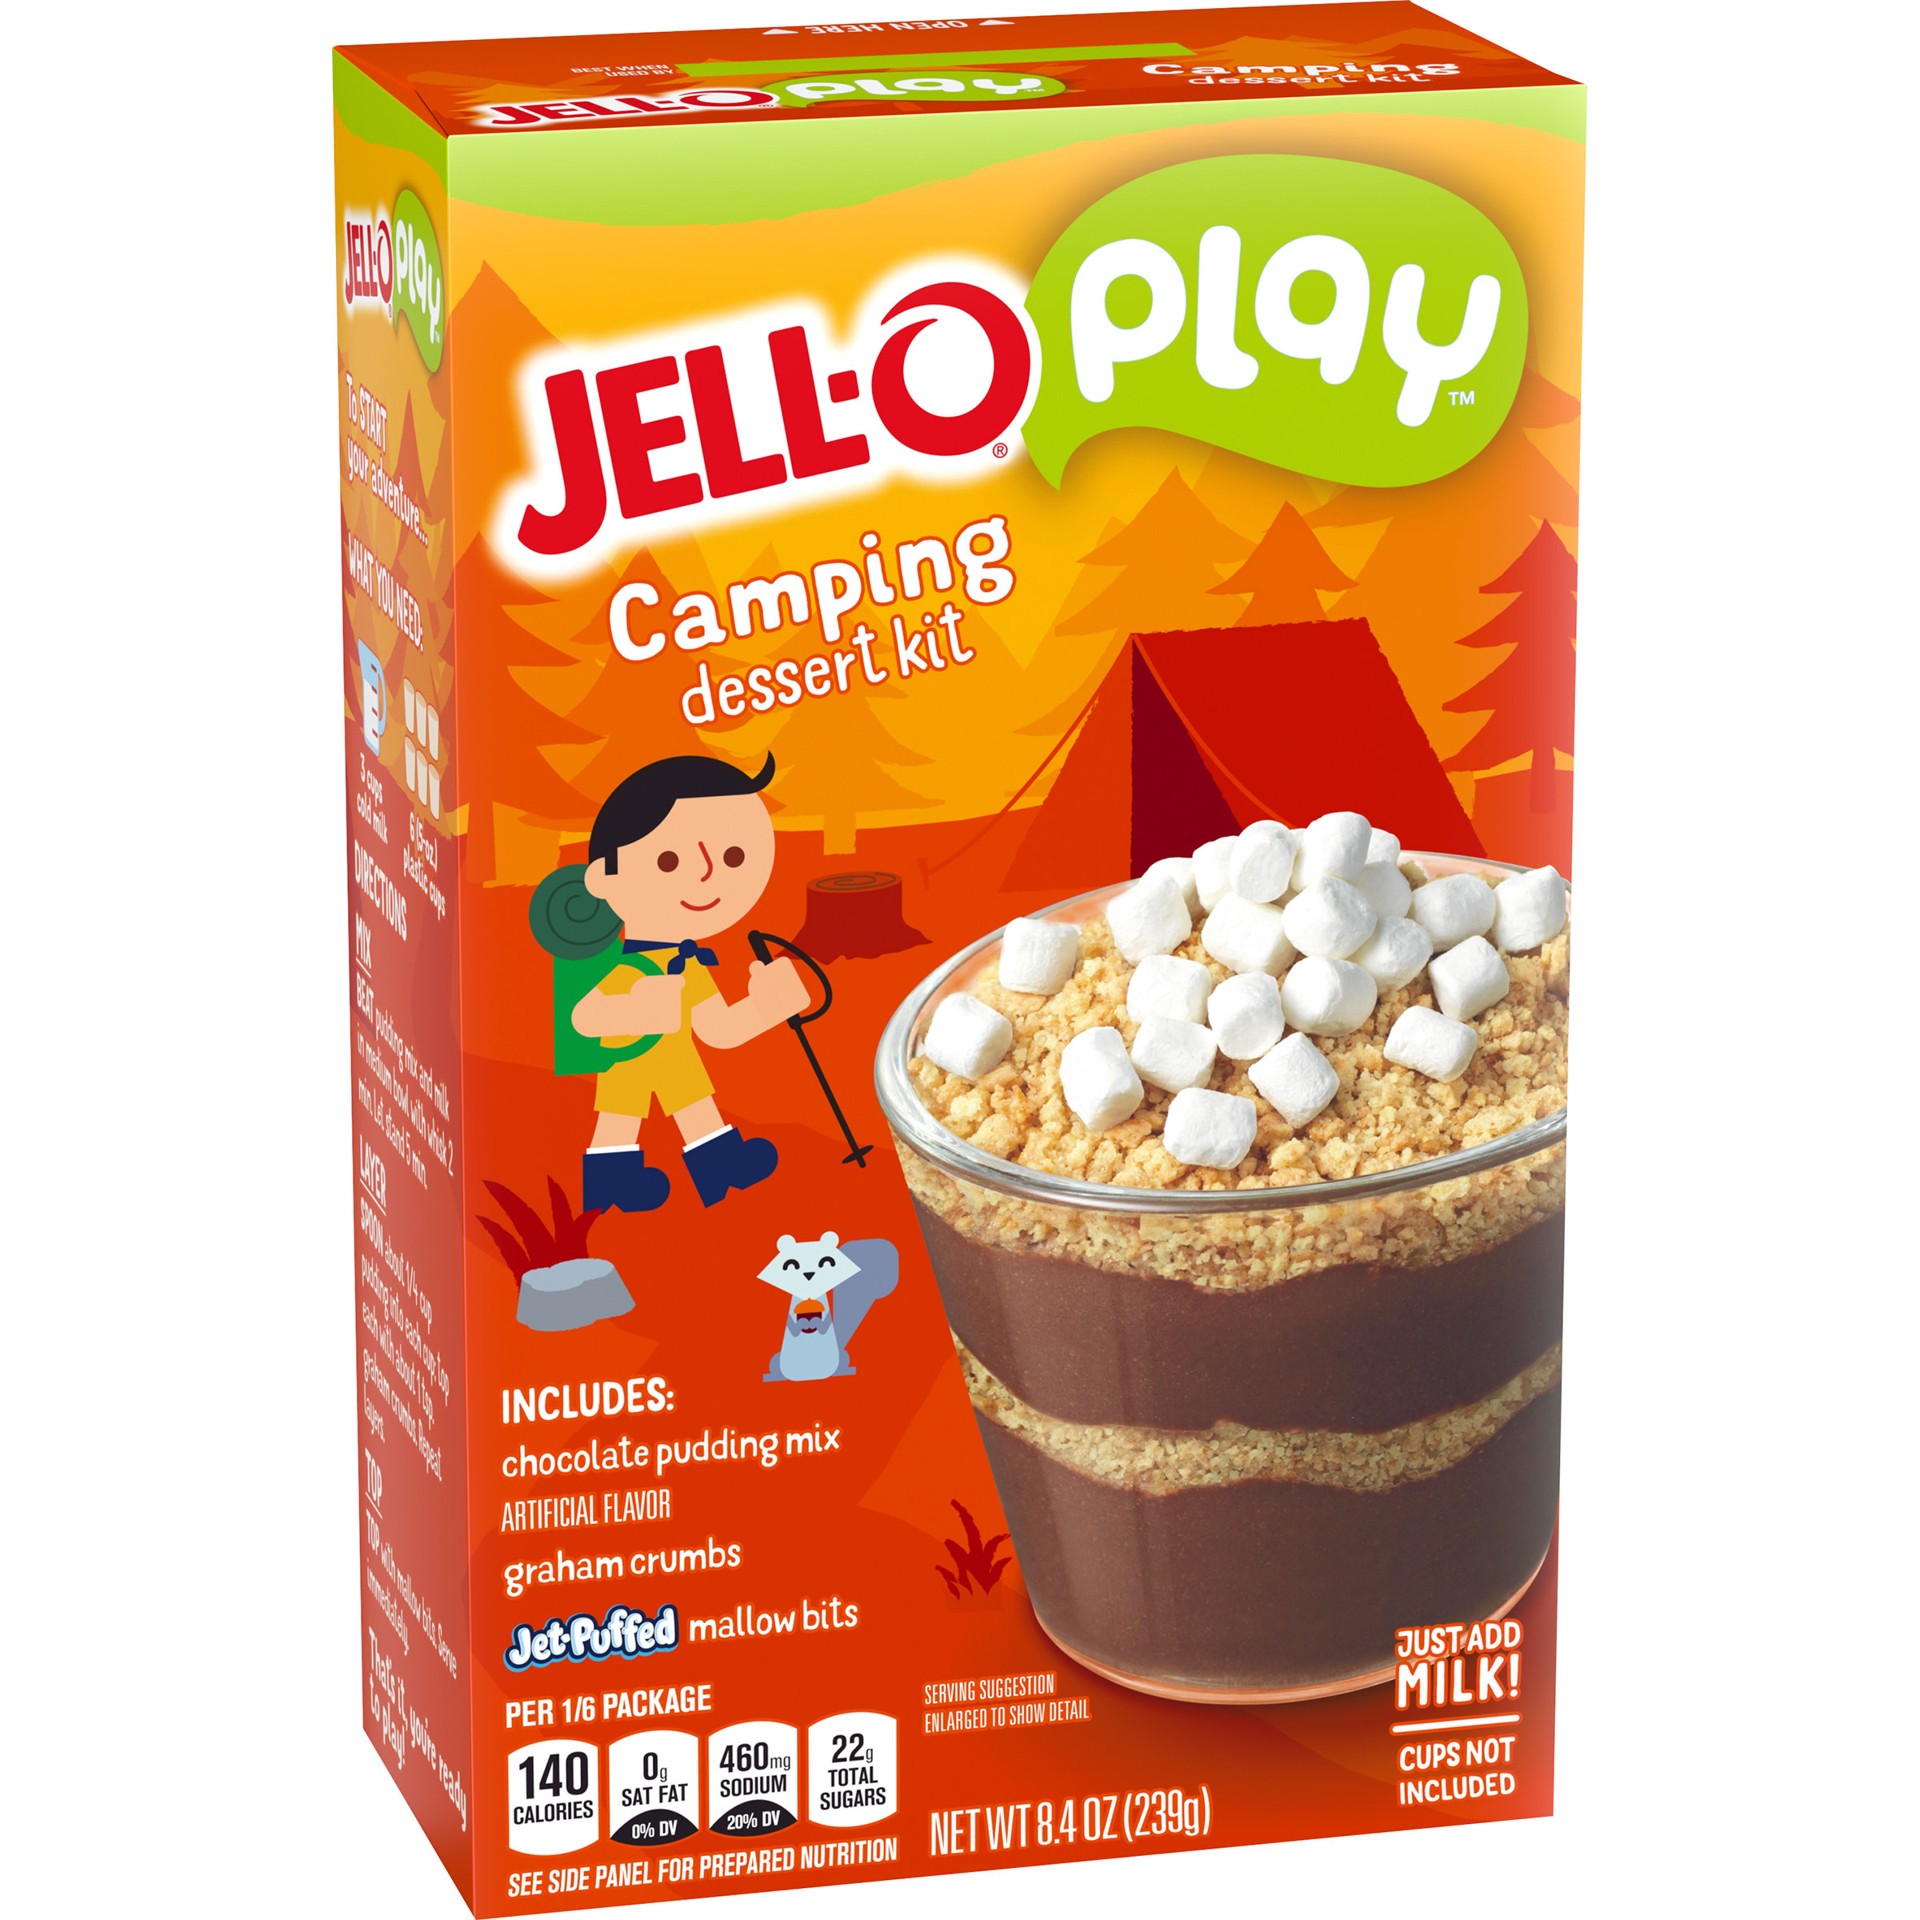 slide 10 of 11, Jell-O Play Camping Dessert Kit with Chocolate Pudding Mix, Graham Crumbs & Jet-Puffed Marshmallow Bits, 8.4 oz Box, 8.4 oz